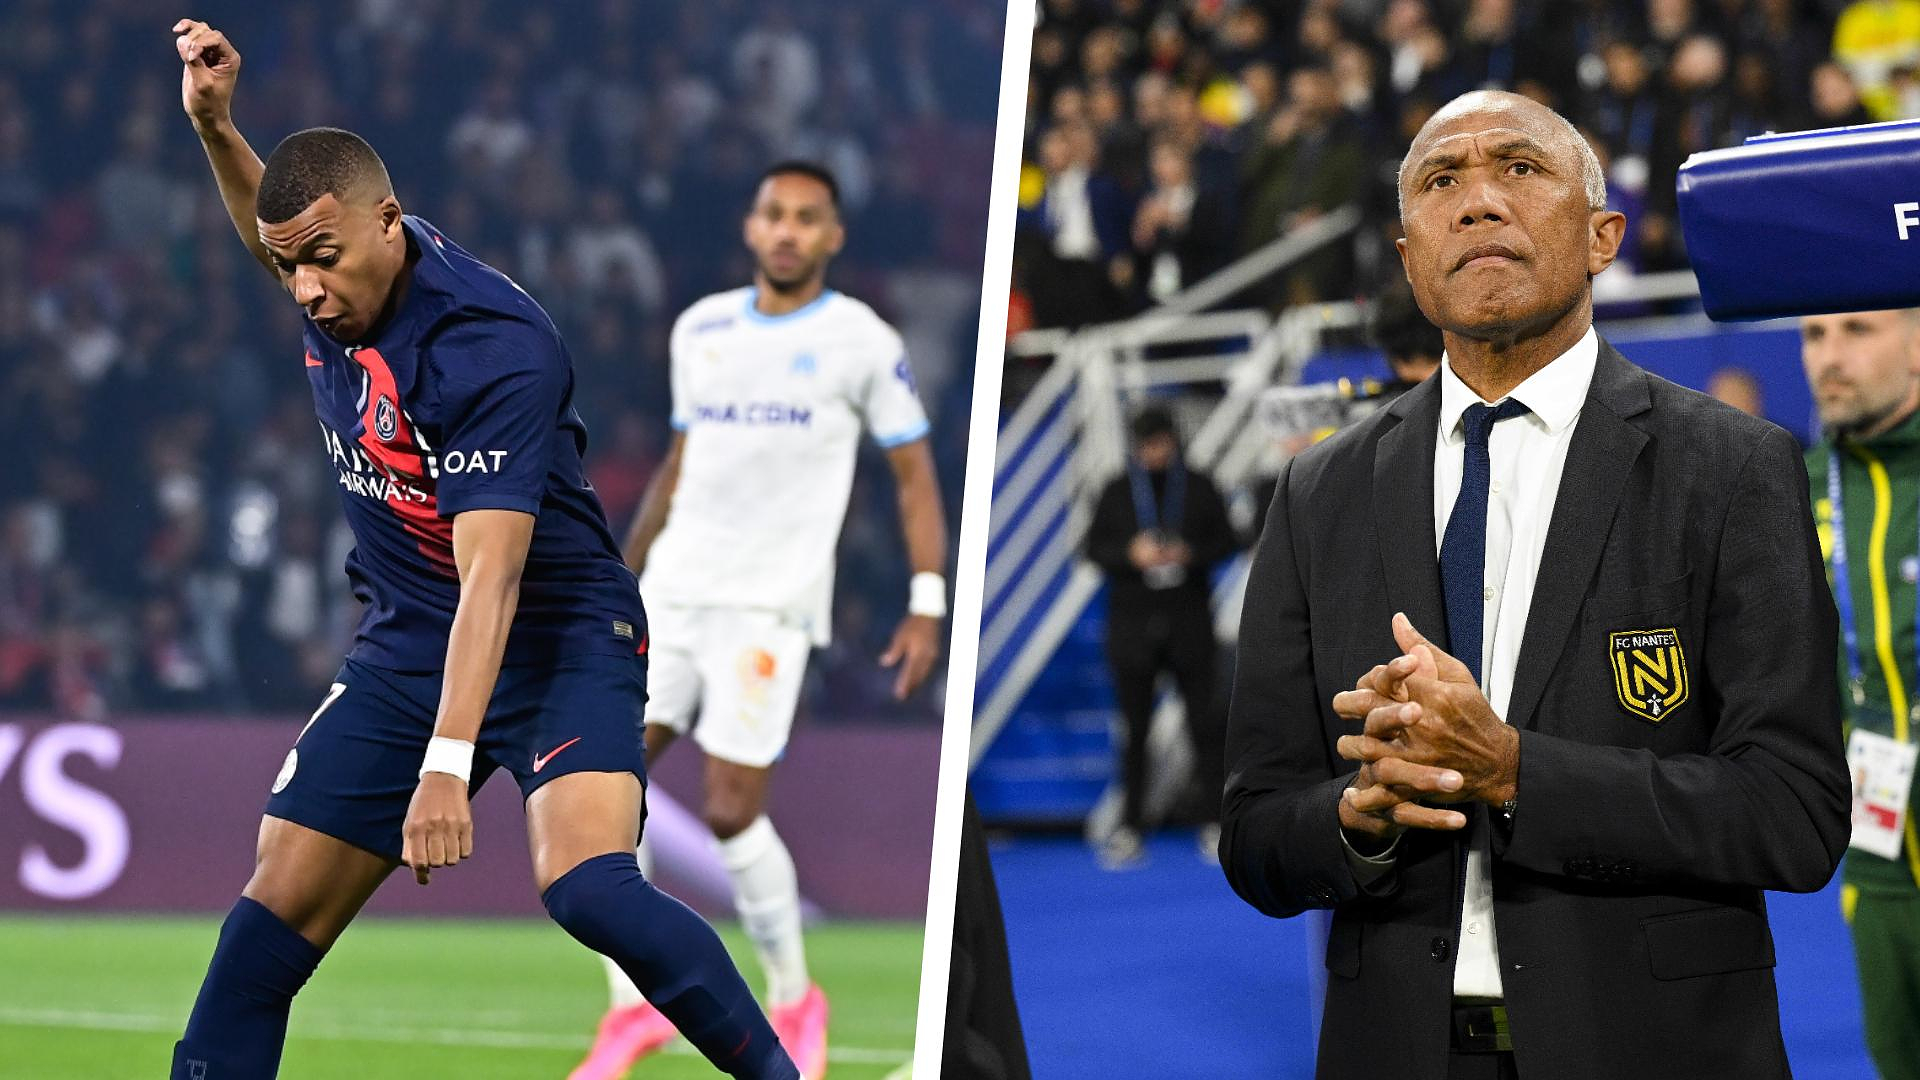 OM-PSG shock, Mbappé possible replacement, FC Nantes in crisis...Five questions on the resumption of Ligue 1